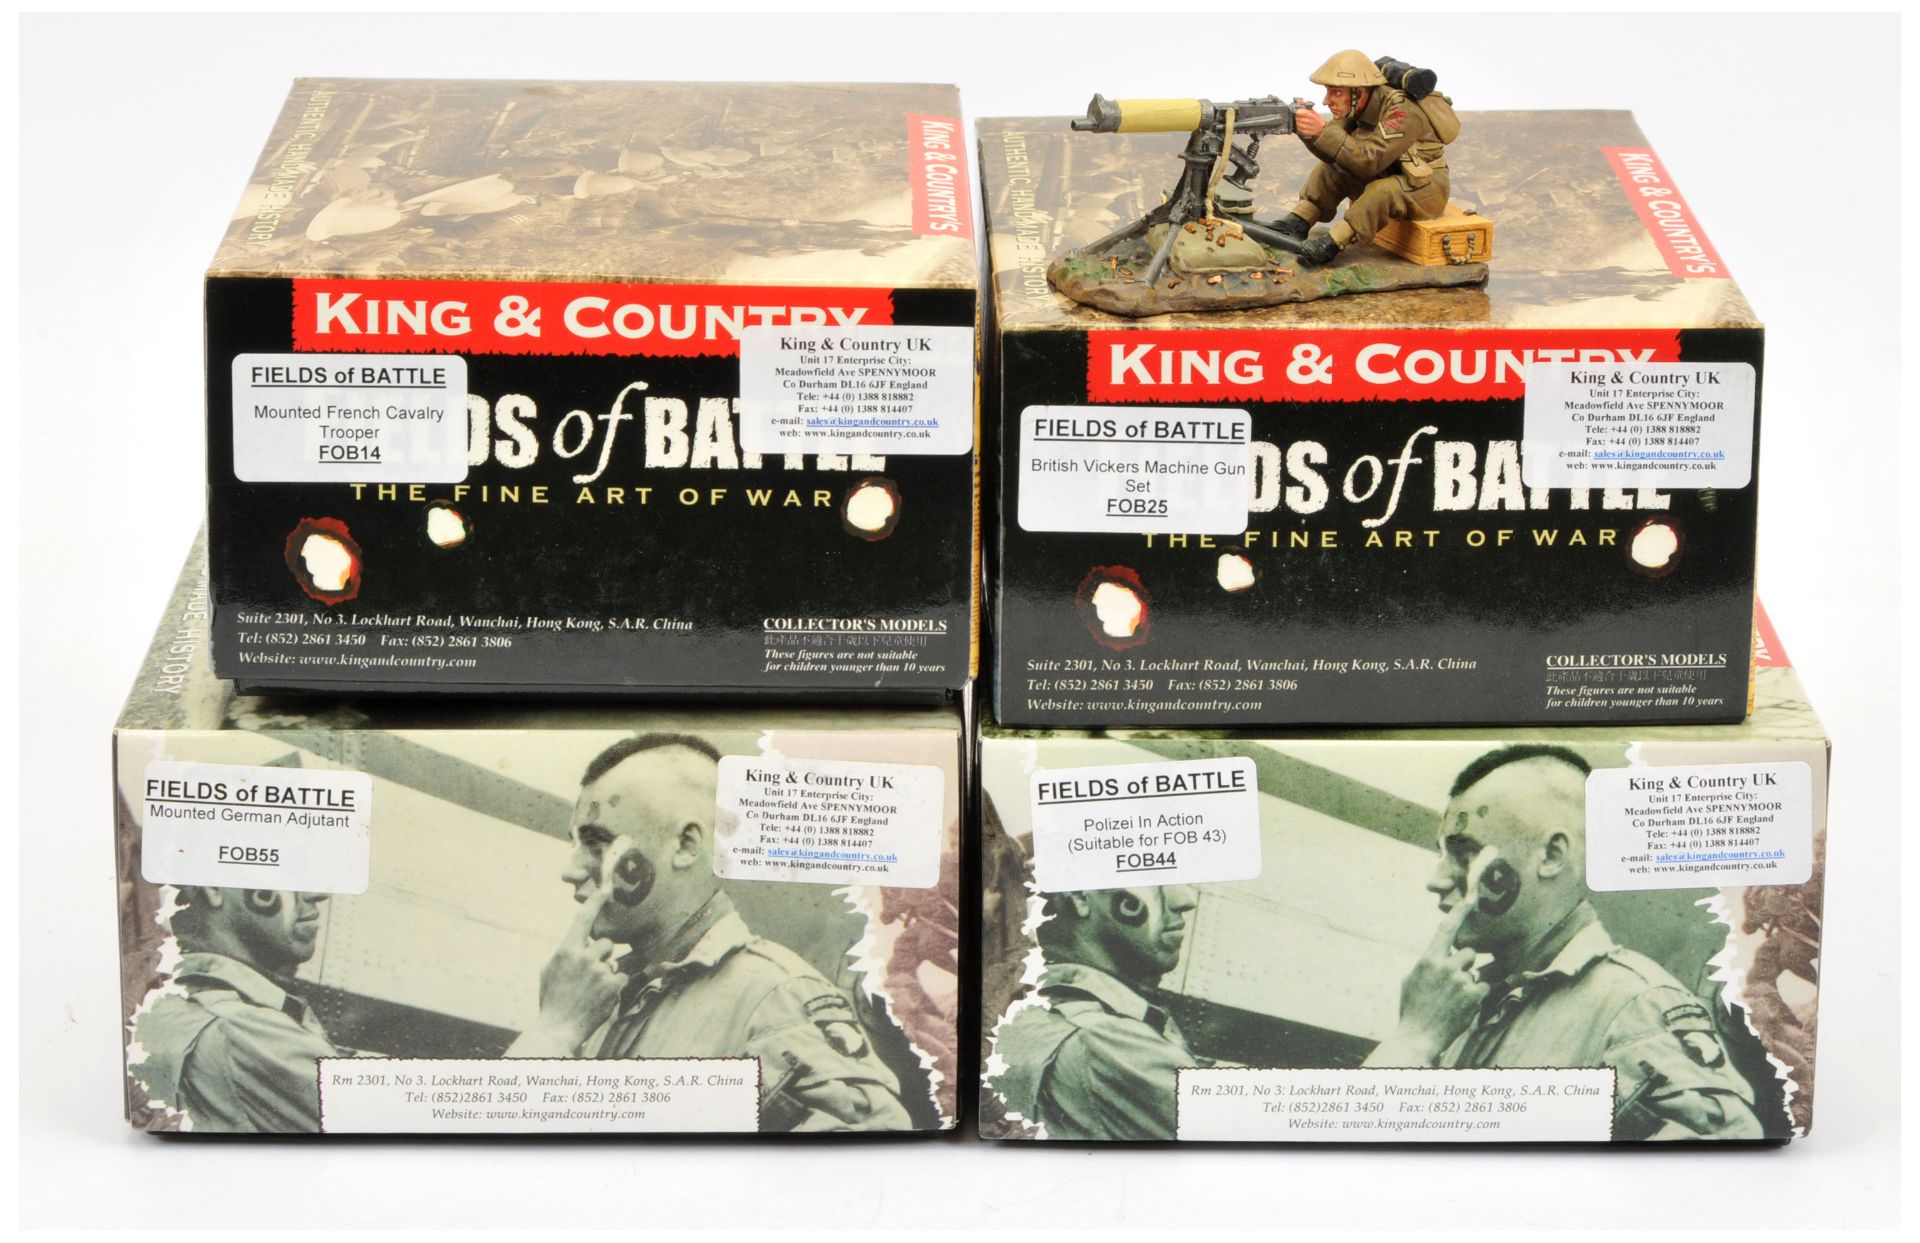 King & Country - Fields of Battle Series, including Set No. FOB14 'Mounted French Cavalry Trooper'